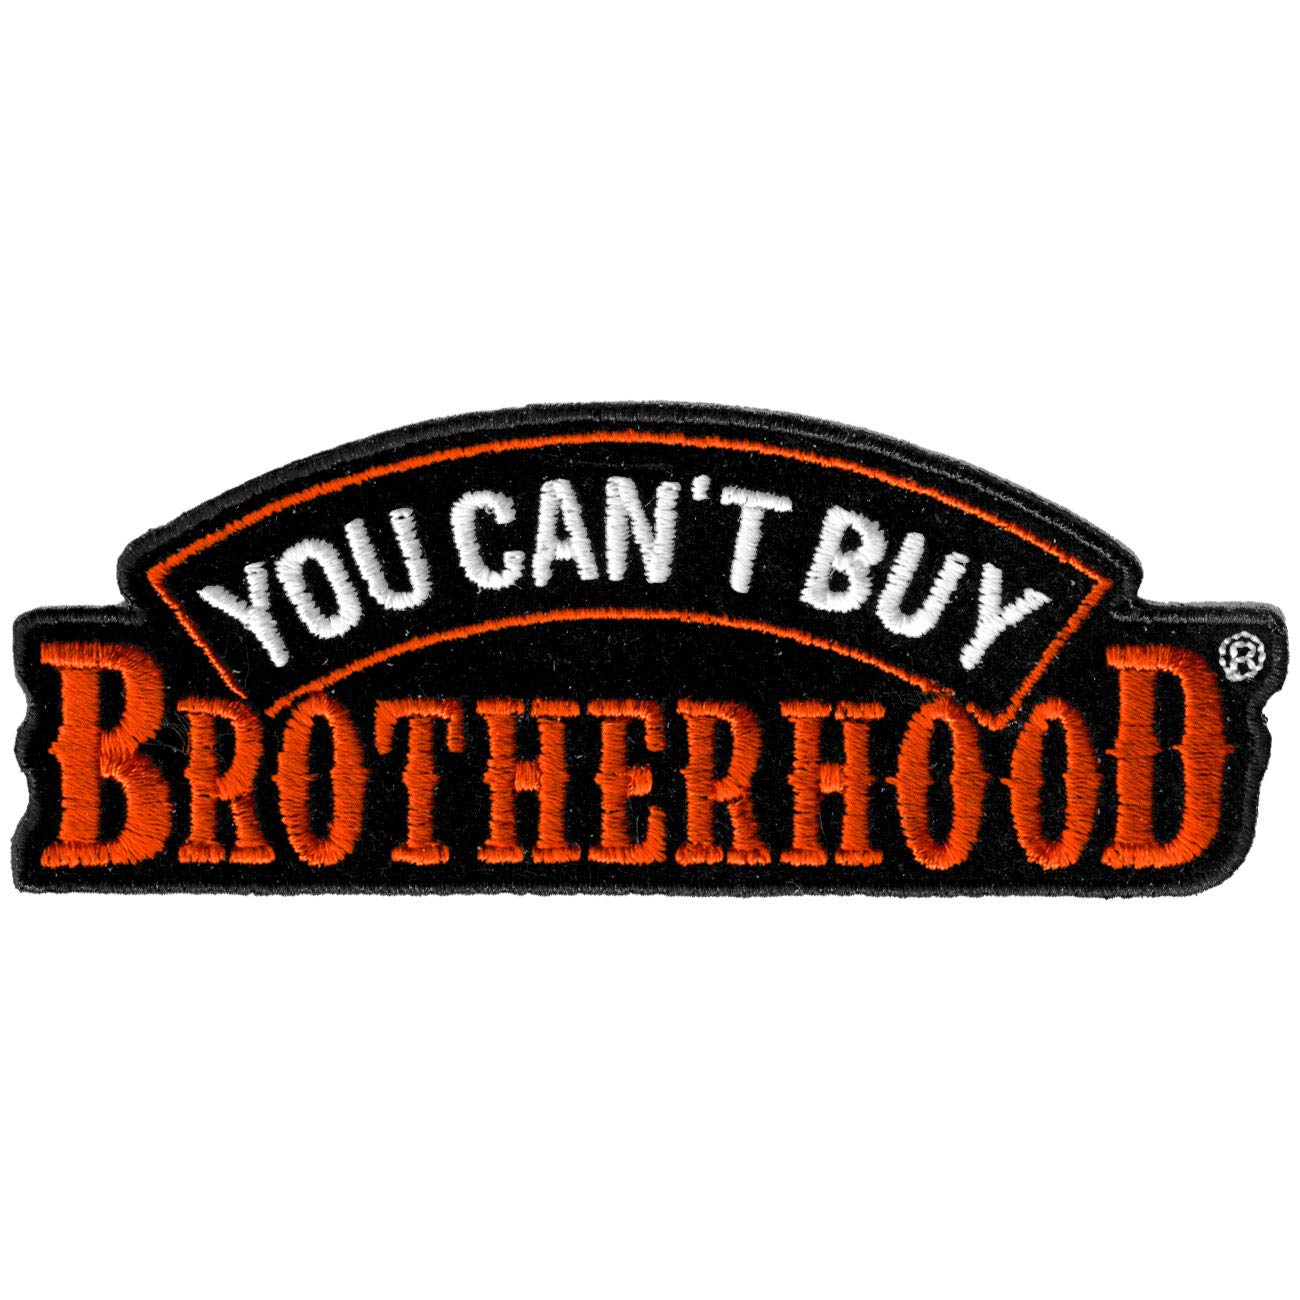 Hot Leathers - PPA7780 You Can't Buy Brotherhood Patch (Mehrfarbig, 10,2 cm Breite x 5,1 cm Höhe) von Hot Leathers